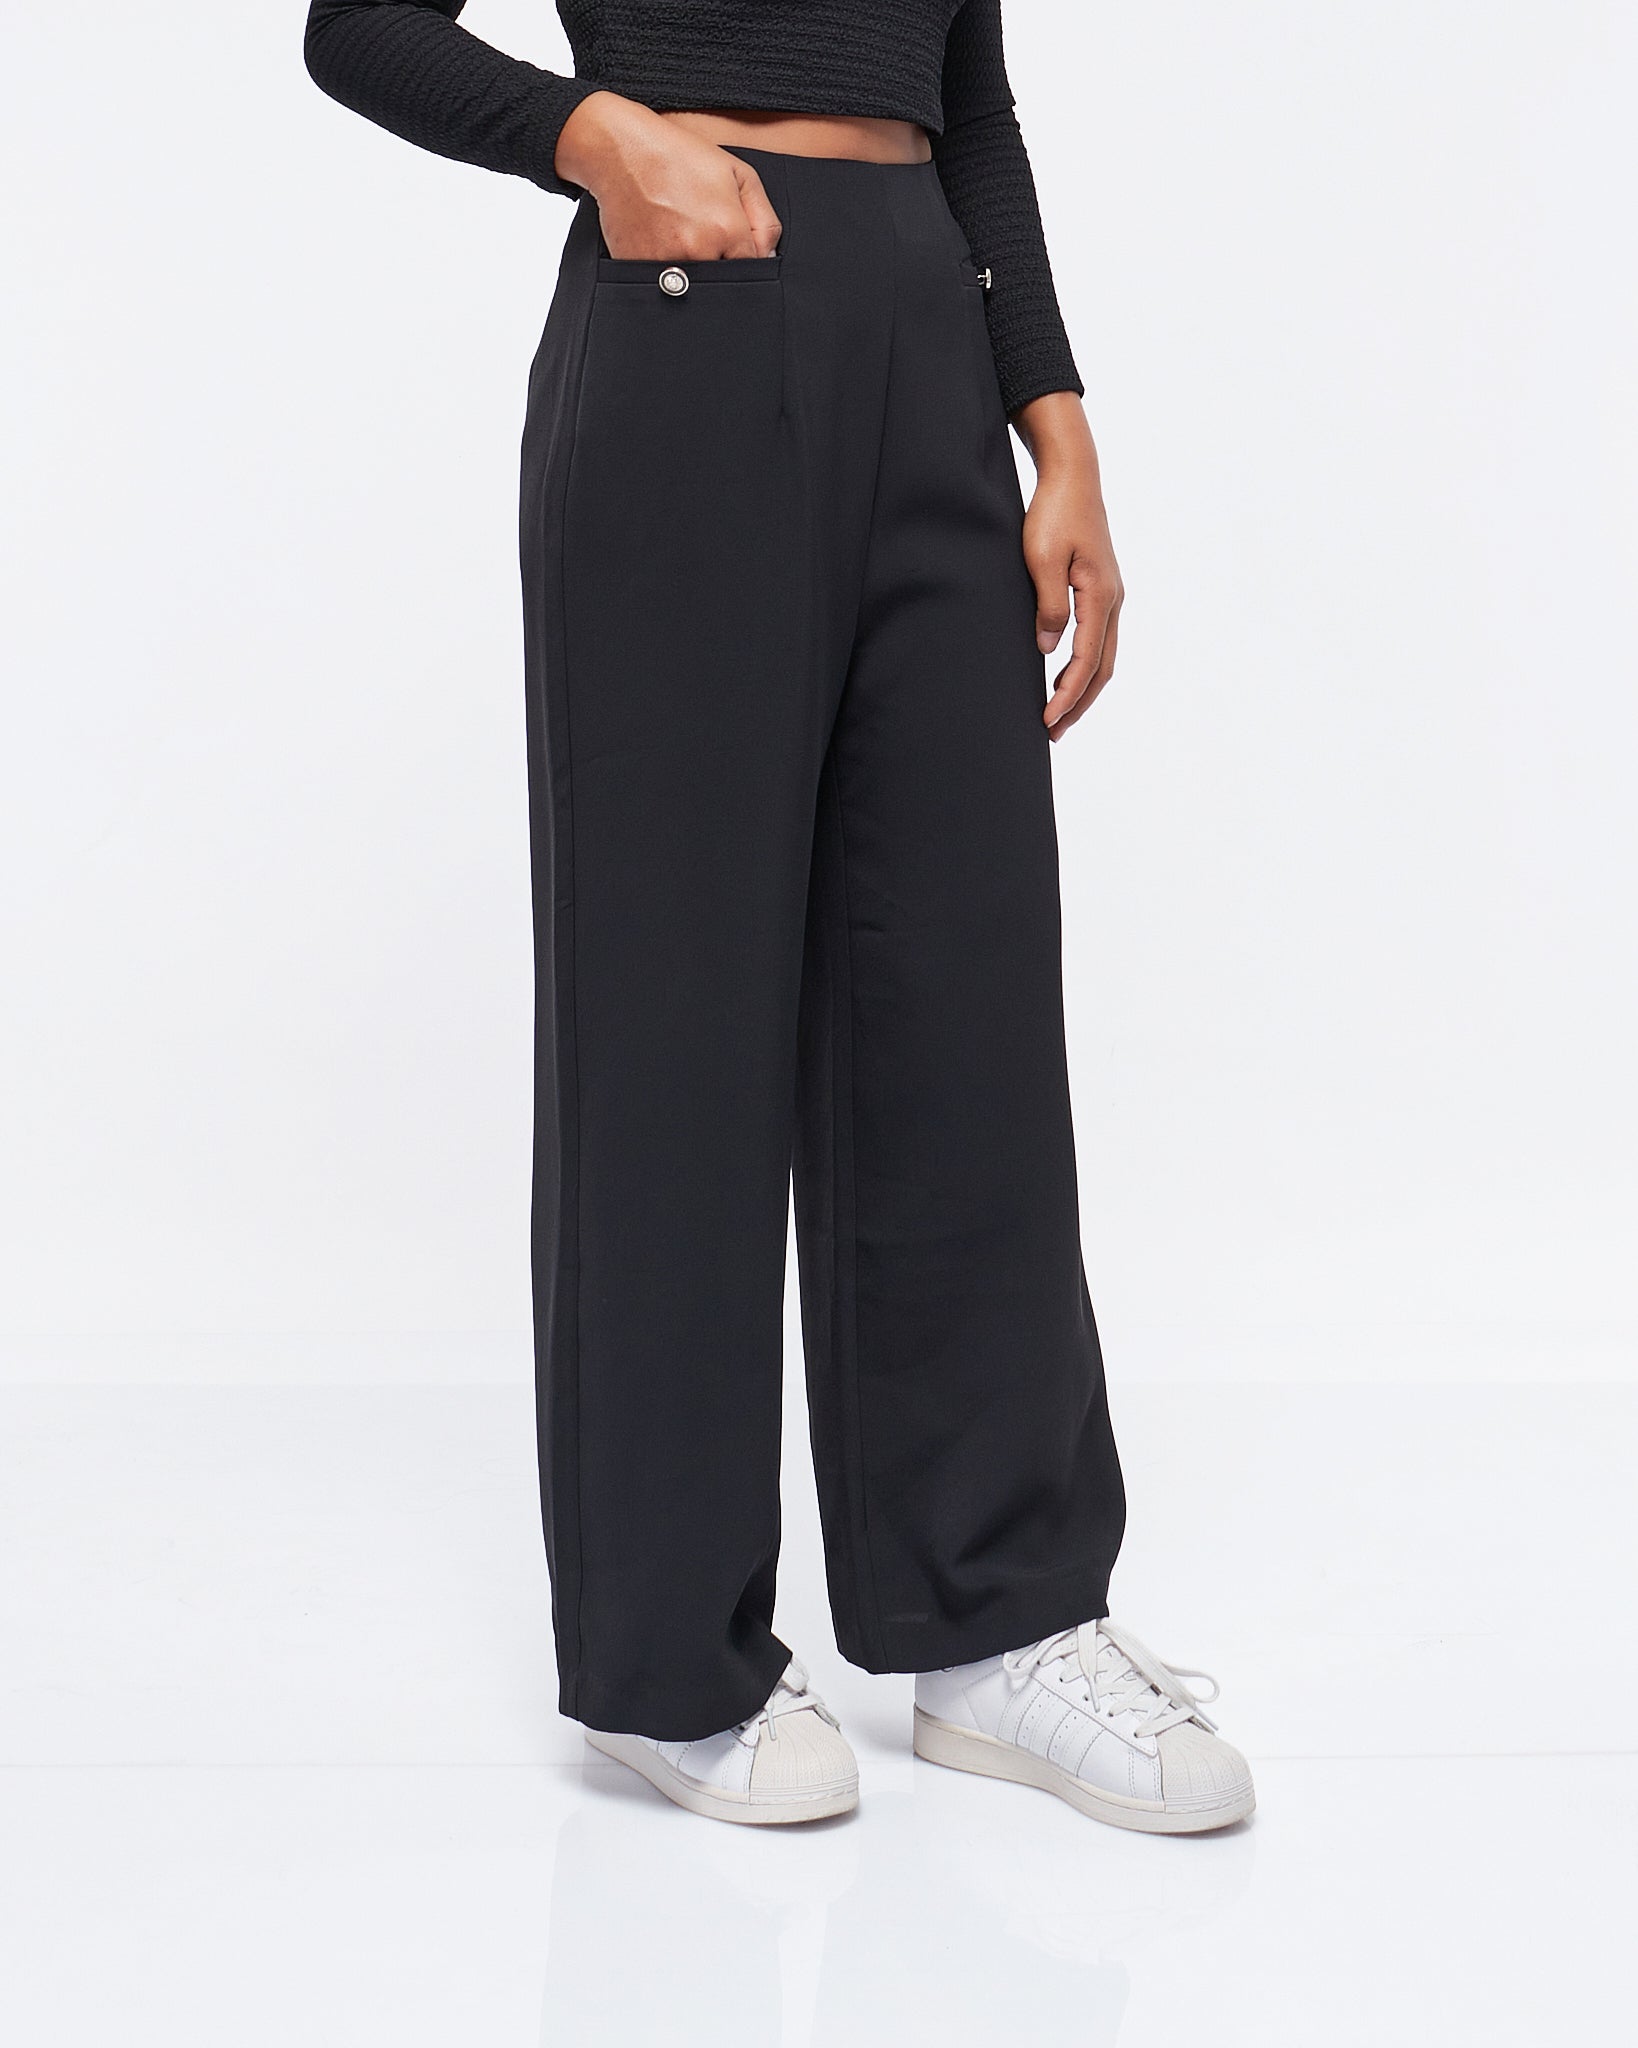 MOI OUTFIT-Front Pocket Wide Leg Lady Pants 17.50